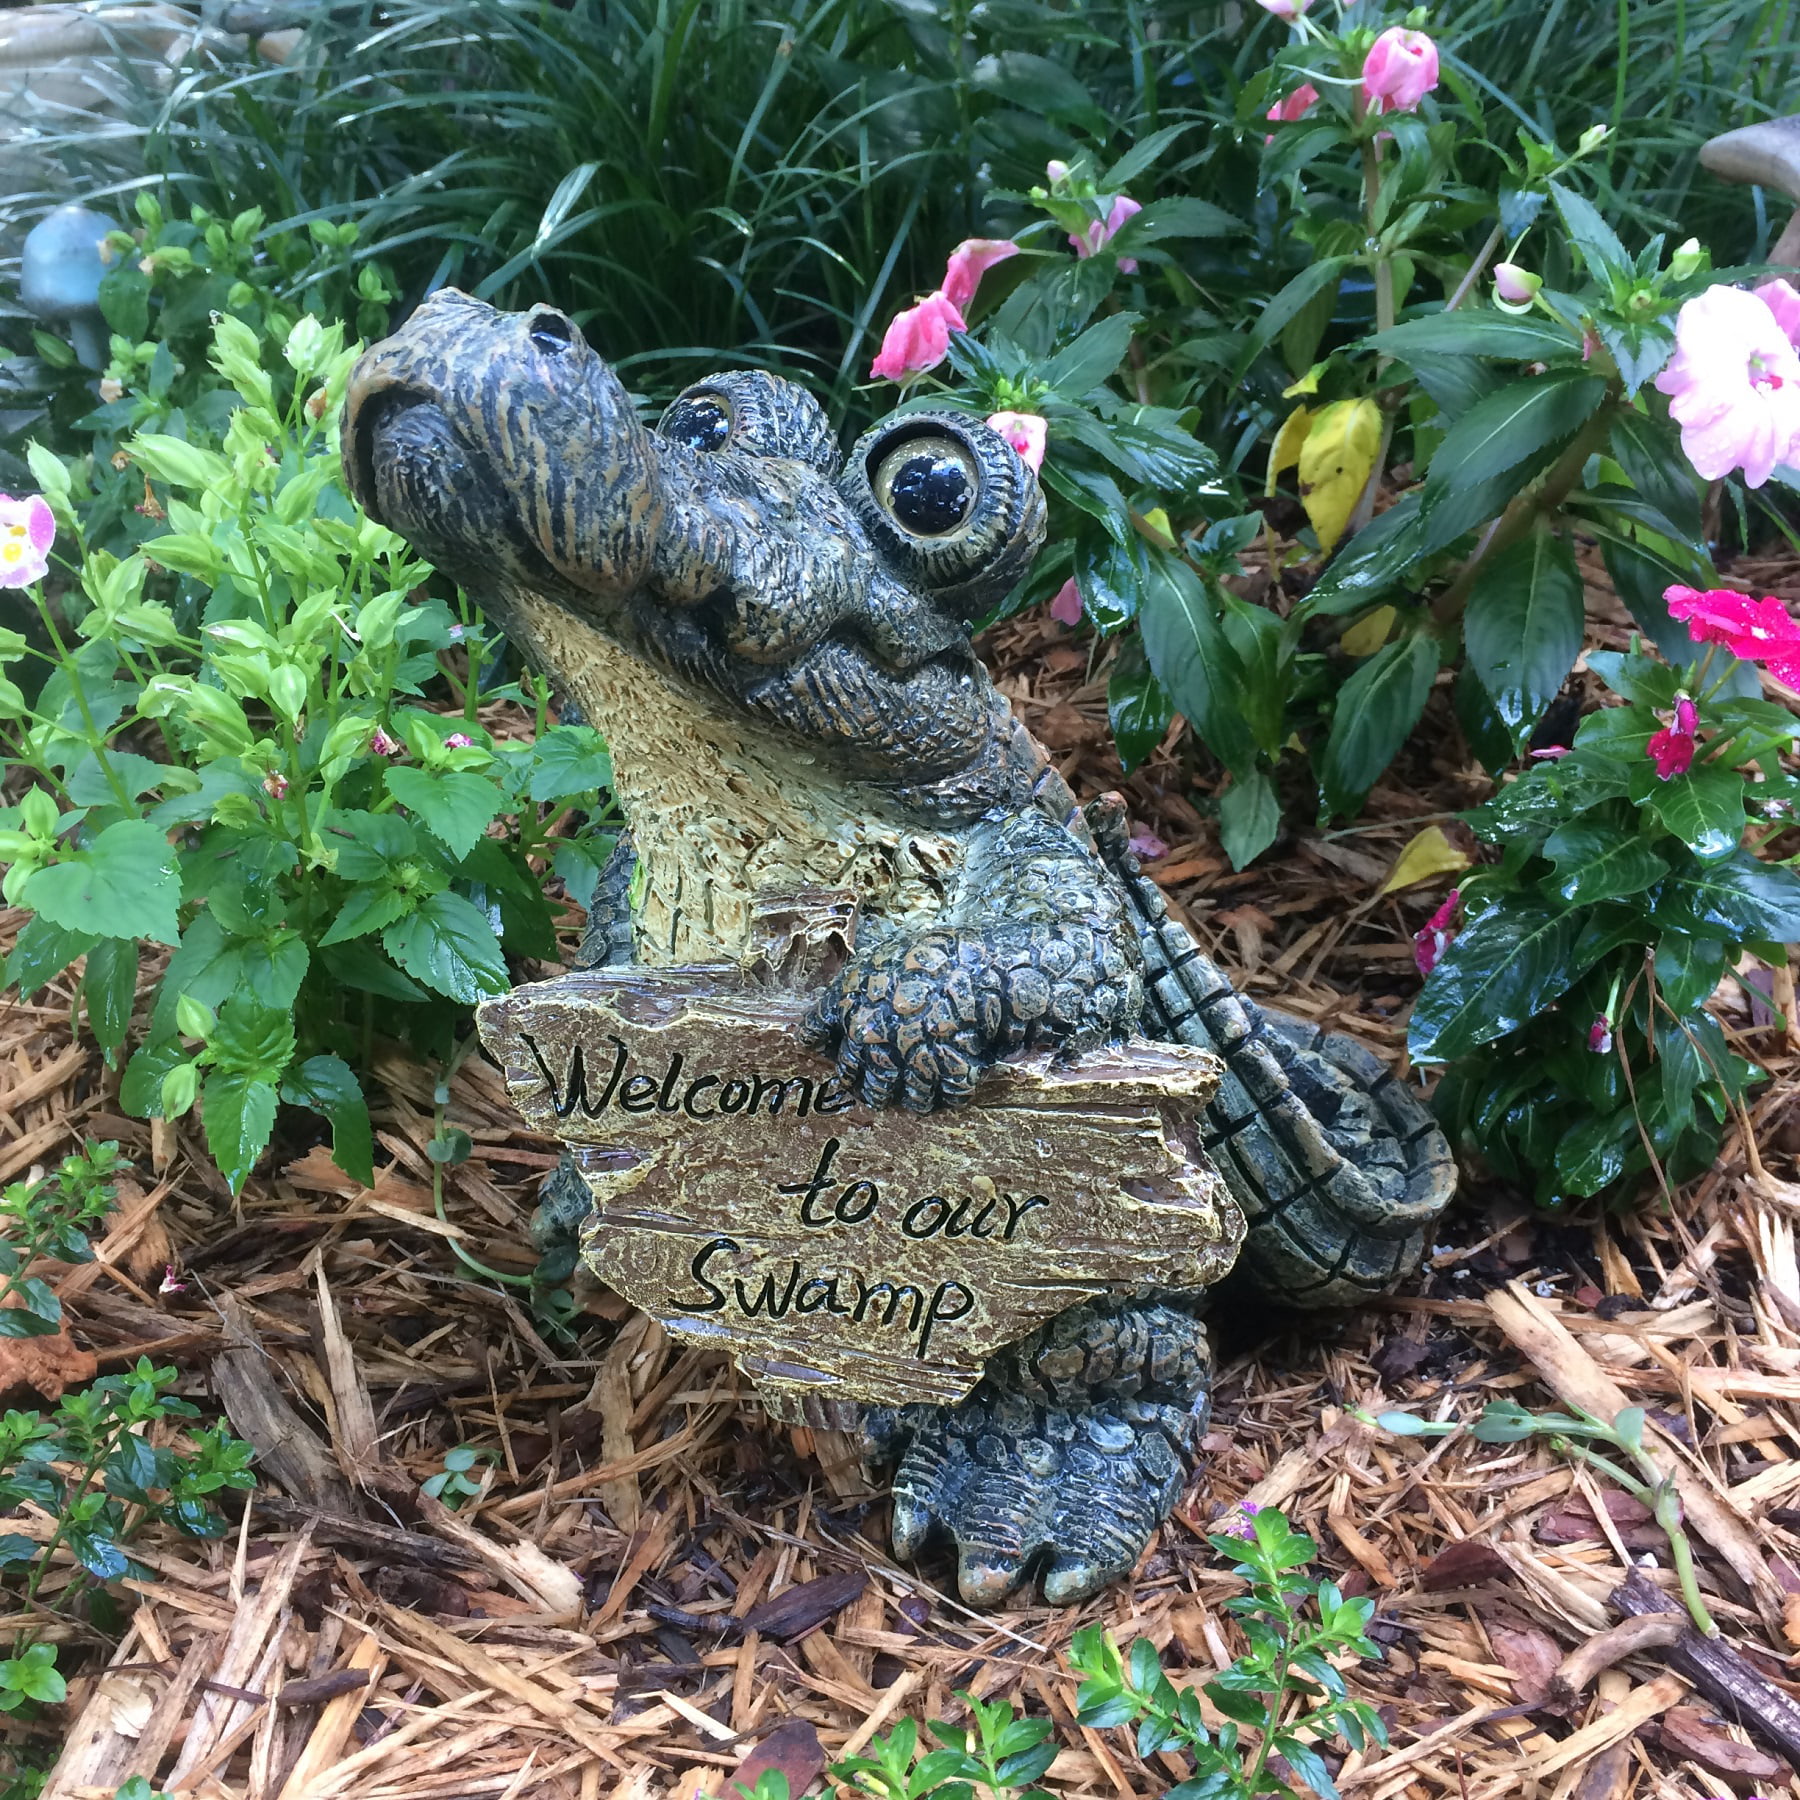 Homestyles Toad Hollow Large Standing Gator with Welcome to our Swamp  Sign Alligator Beach Garden Statue 11H 